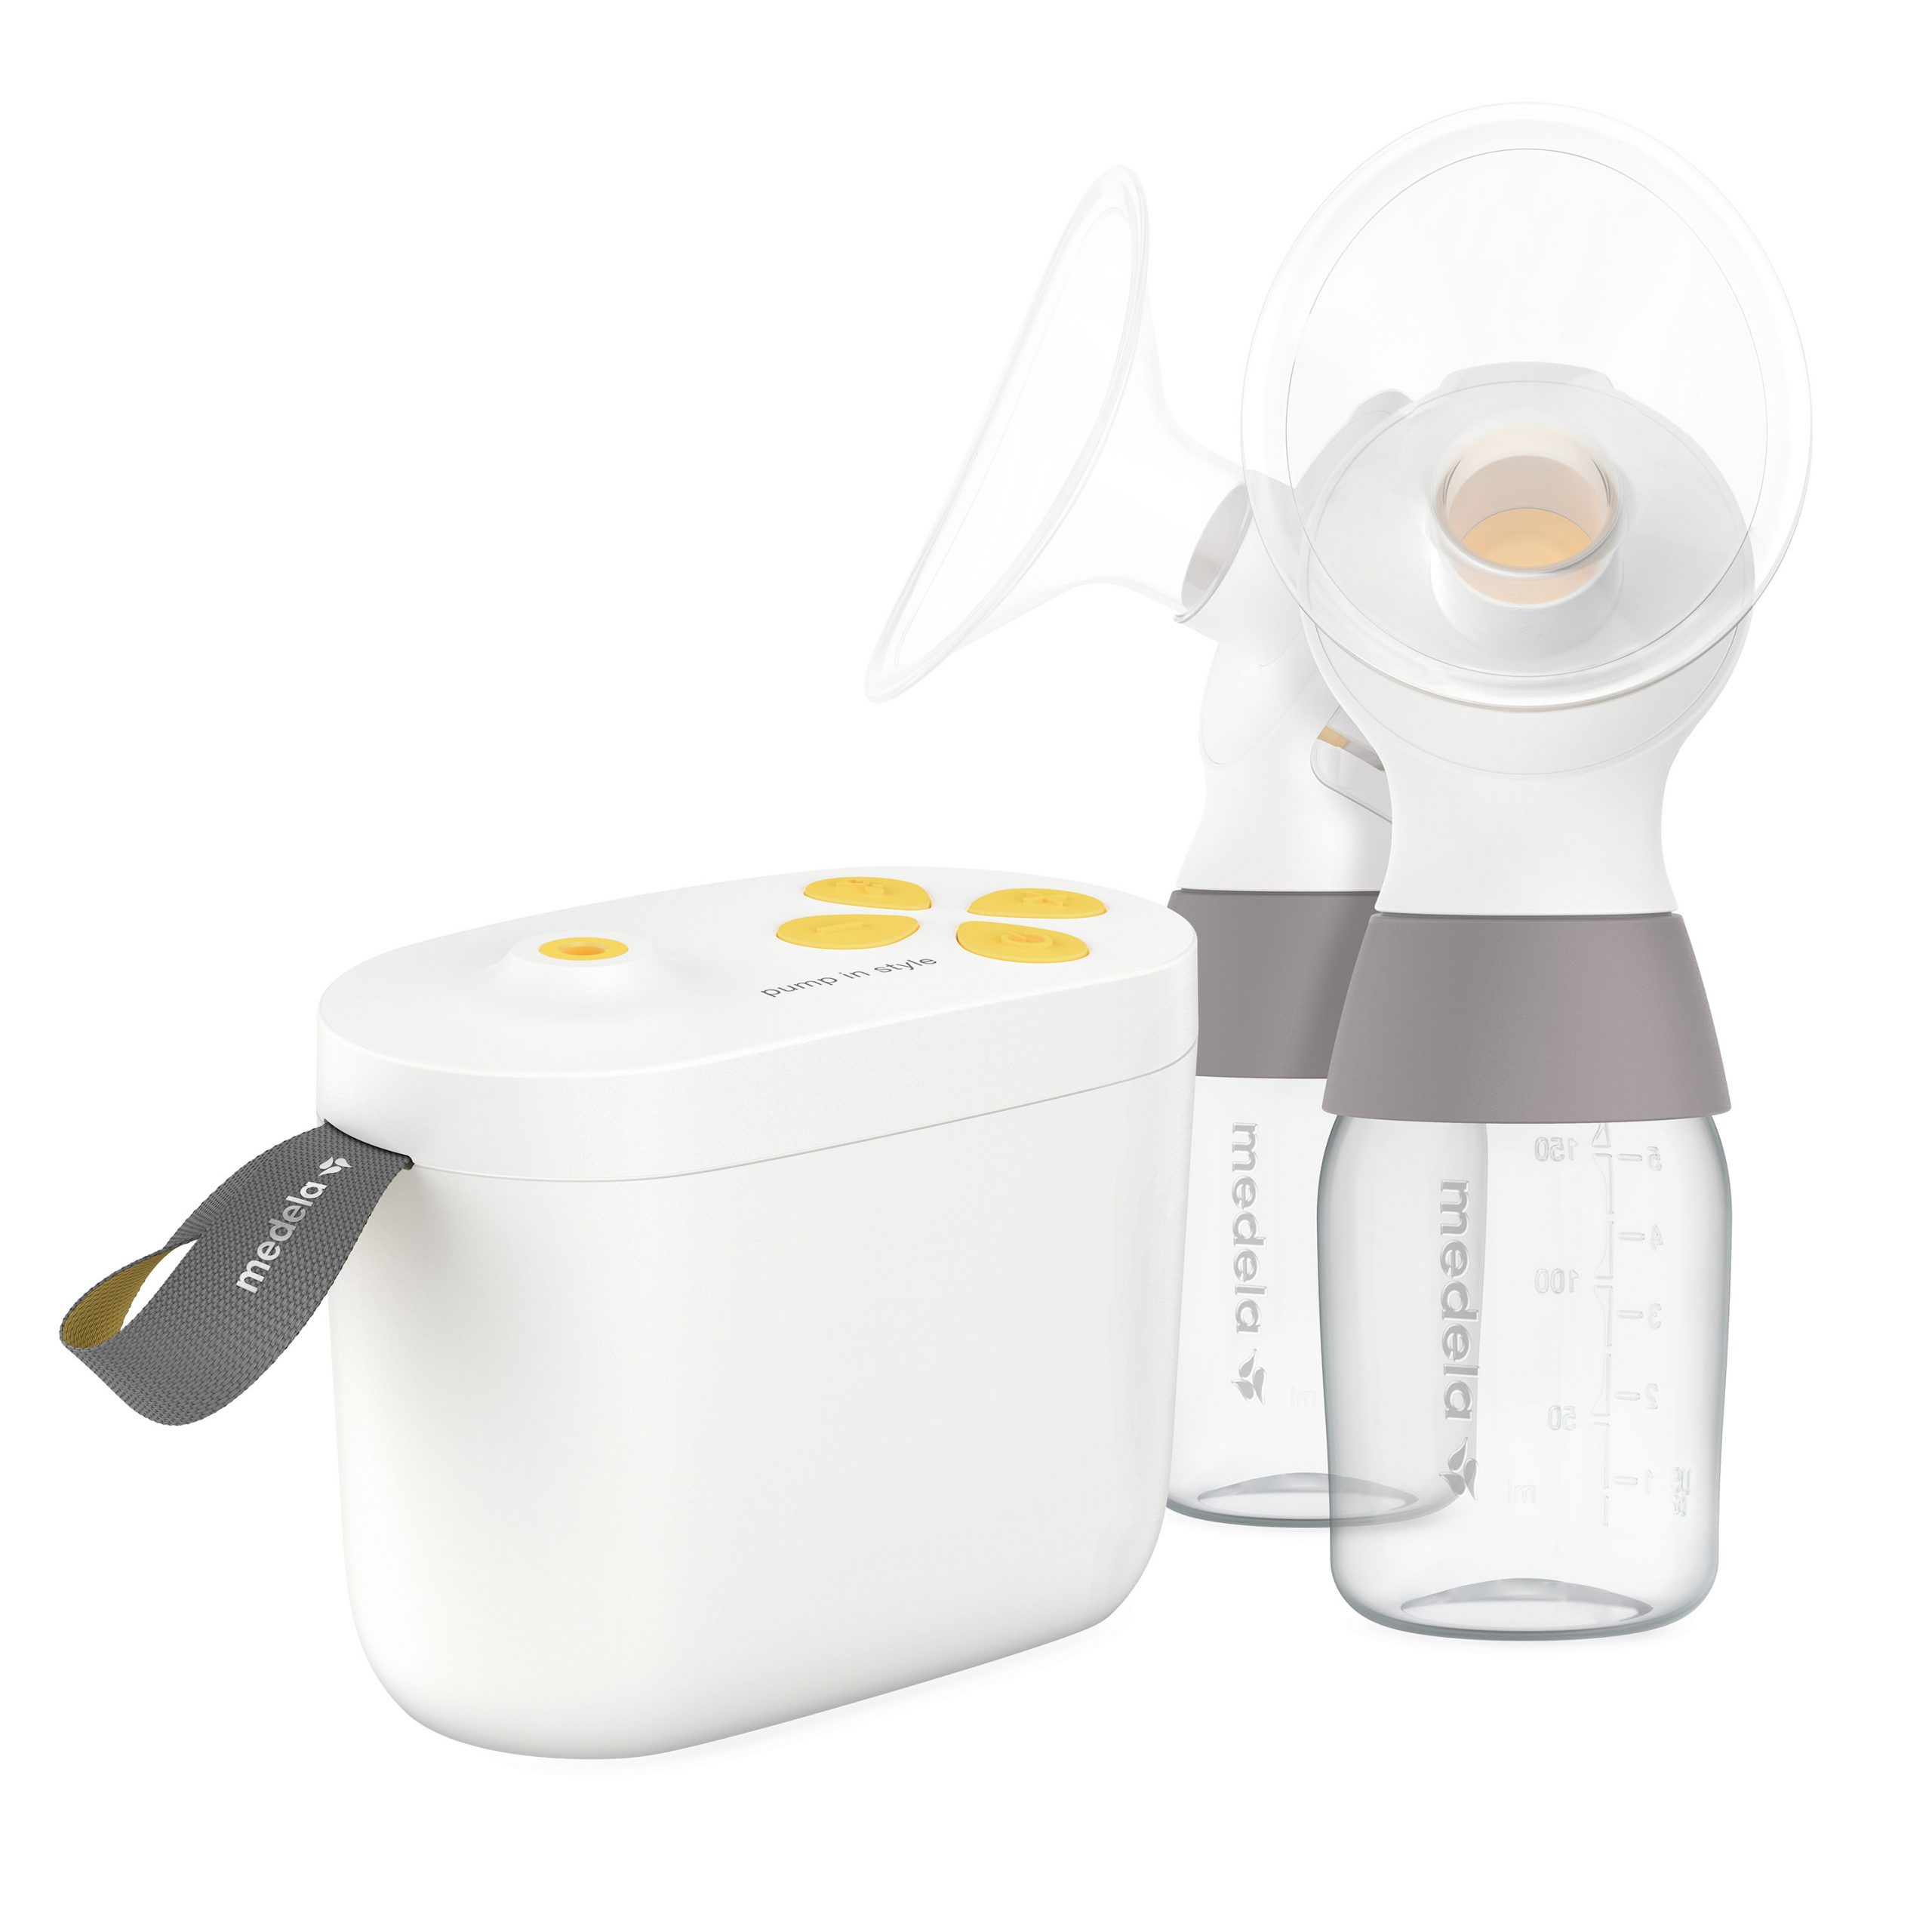 medela-pump-in-style-with-maxflow-neb-medical